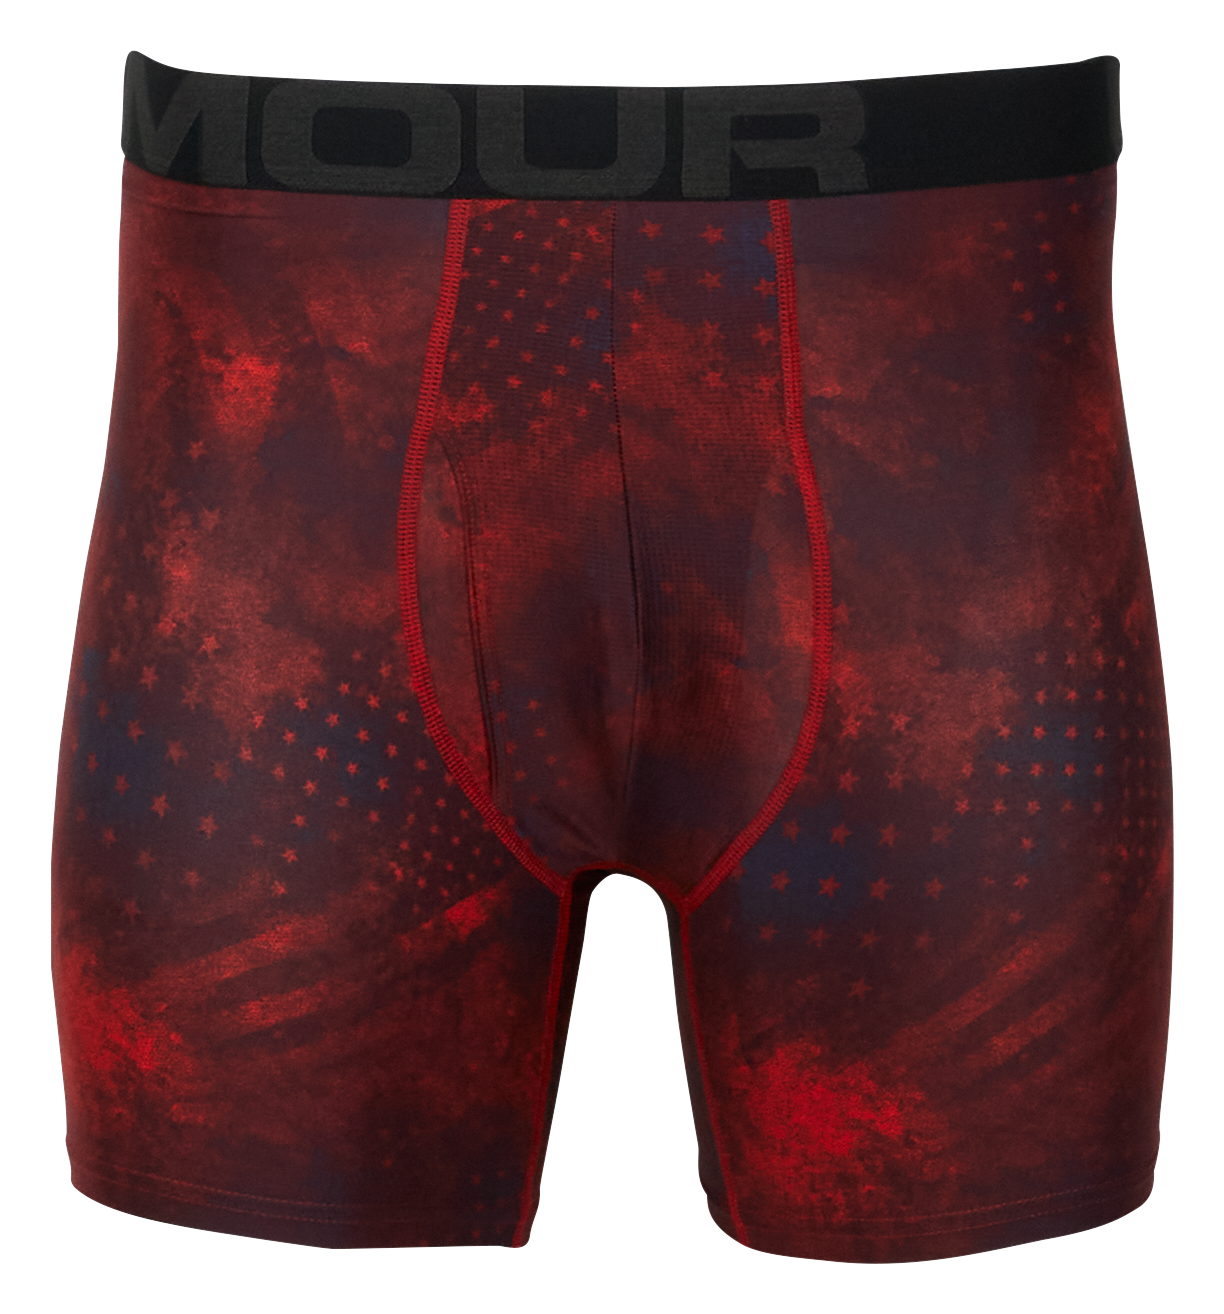 Under Armour Tech 6"" Patterned Boxerjock Shorts for Men - Red/Jet Gray - L